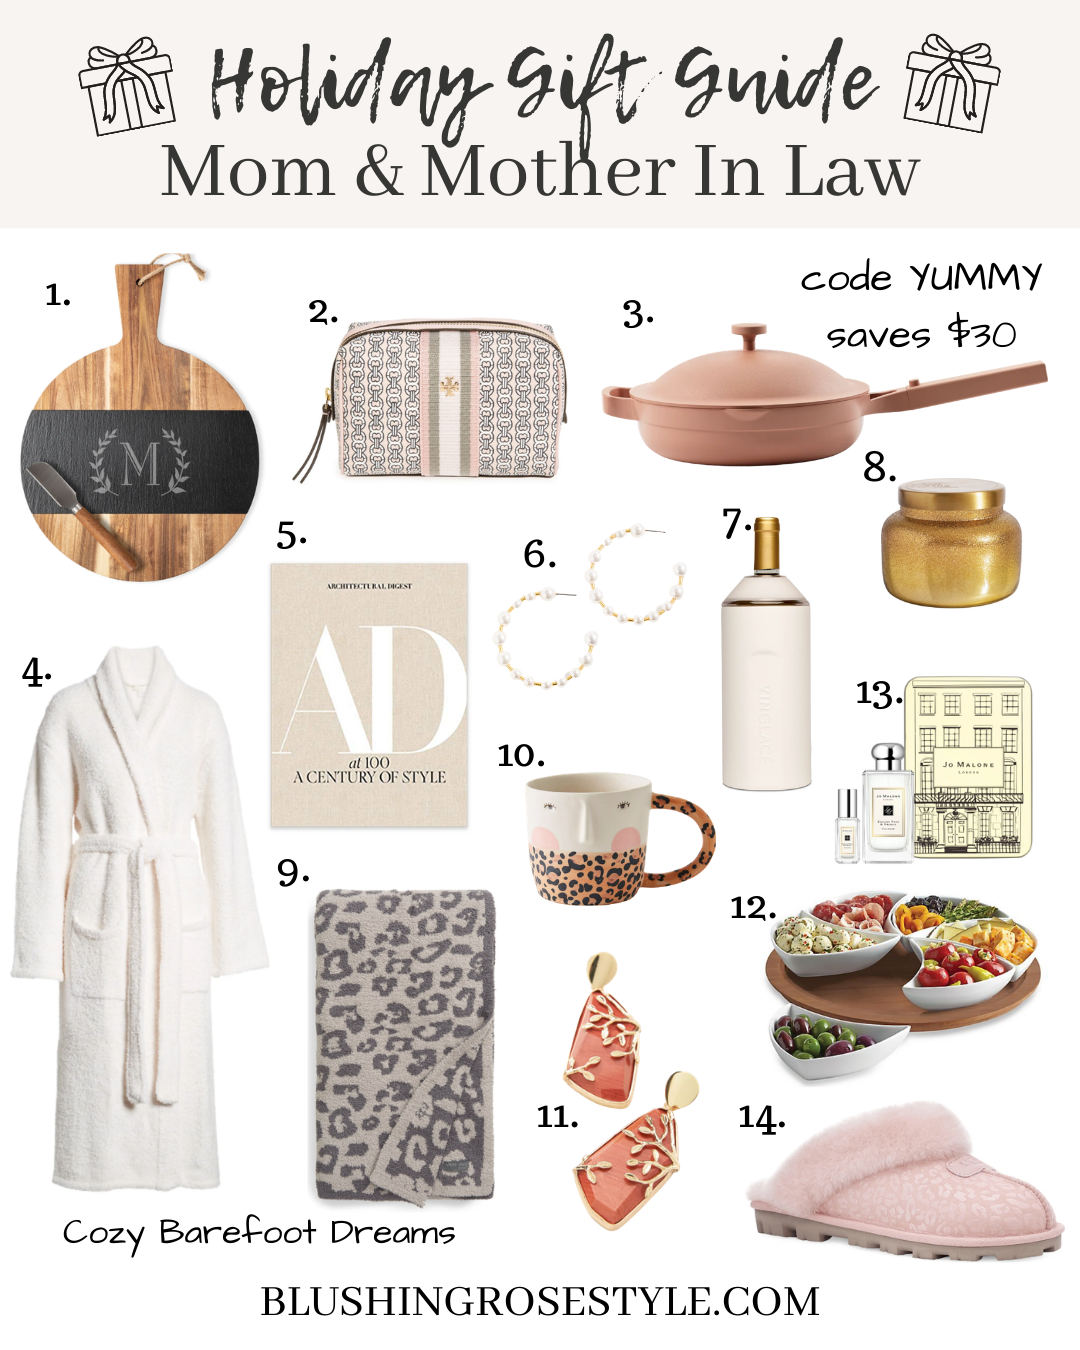 Gifts for mom & MIL